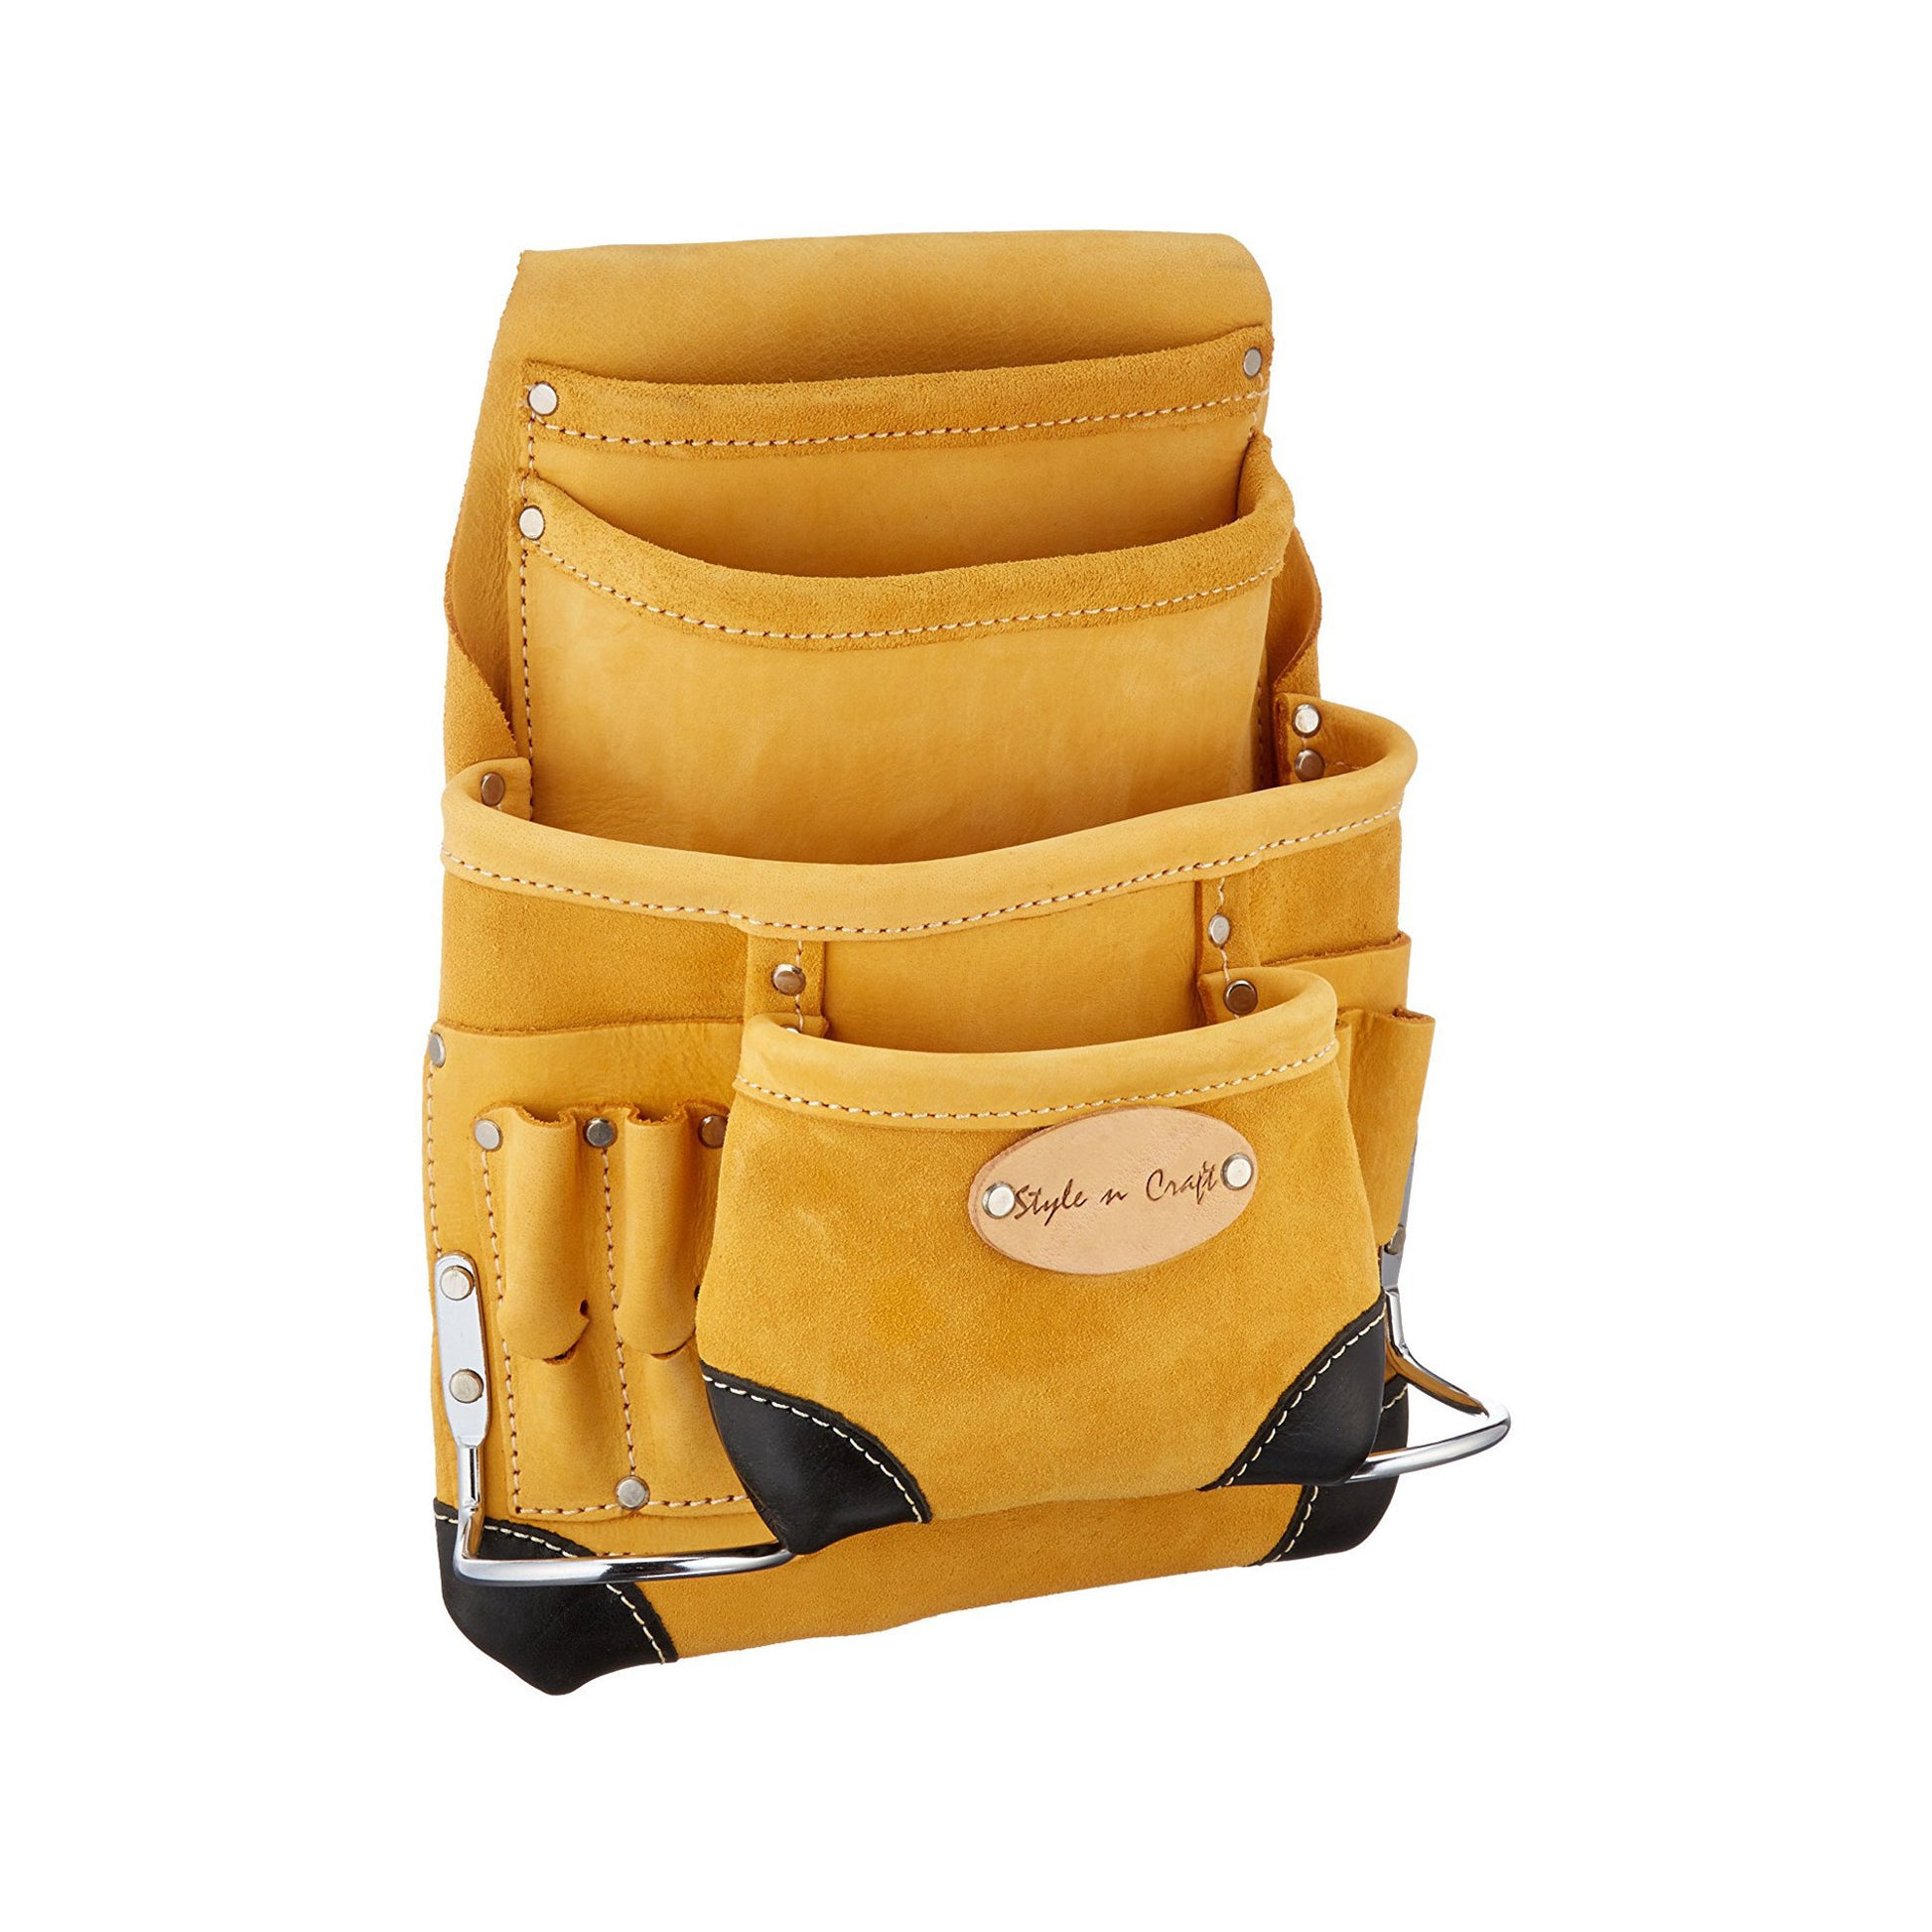 Style n Craft 93923 - 10 Pocket Carpenter's Nail & Tool Pouch in Yellow Top Grain Leather with Reinforced Corners in Black Top Grain Leather - Front Angled View